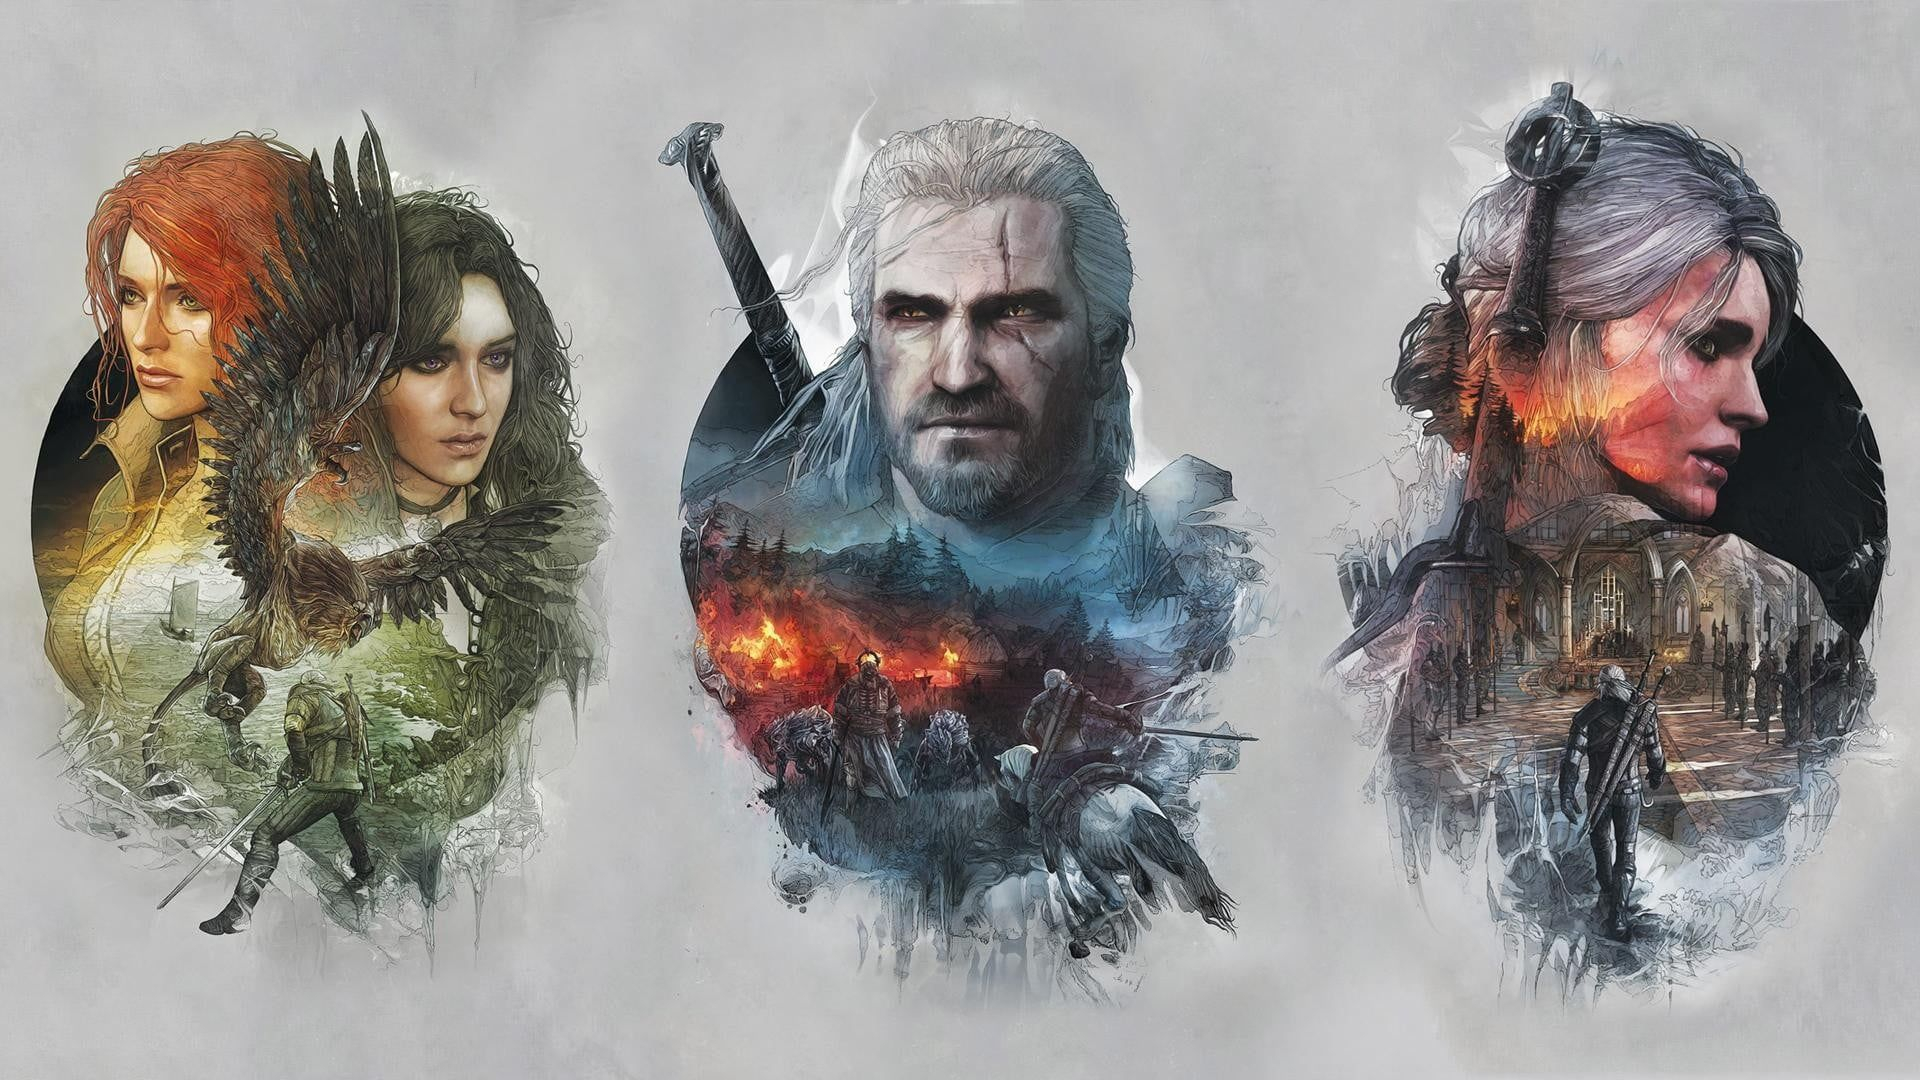 1920x1080 The Witcher digital wallpaper The Witcher Geralt of Rivia The Witcher 3: Wild Hunt #1080P #wallpaper #hdwallpaper #&acirc;&#128;&brvbar; | The witcher, Digital wallpaper, The witcher 3